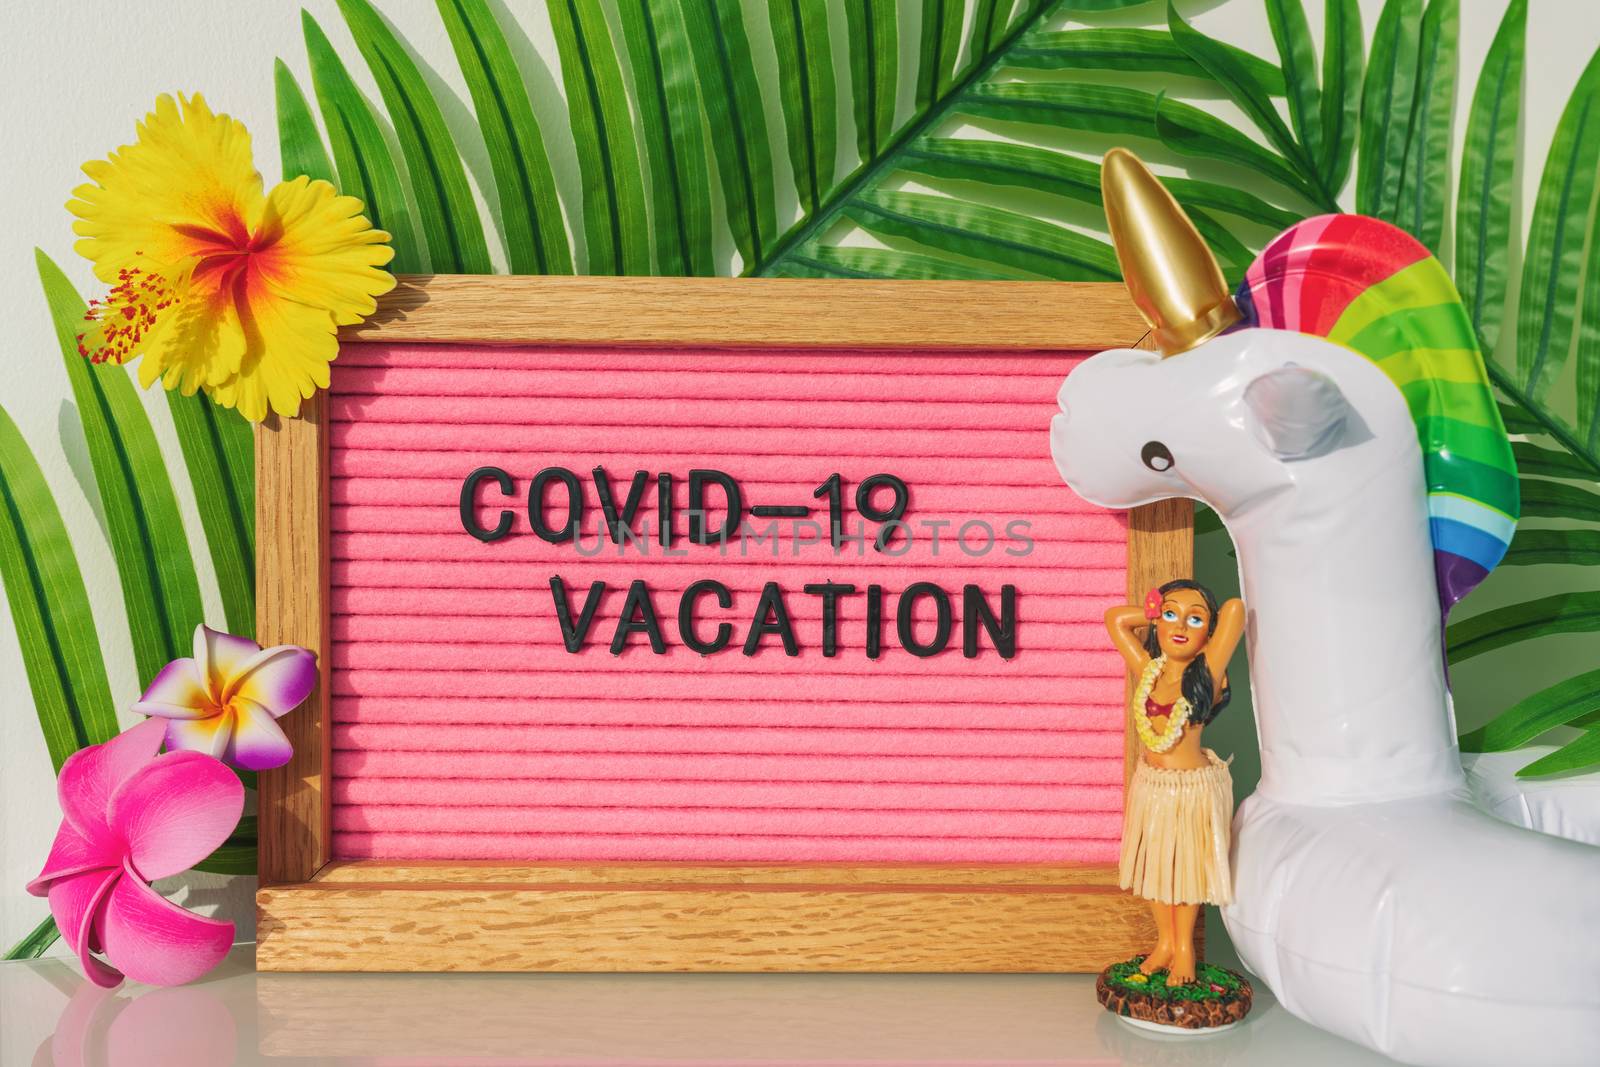 COVID-19 vacation at home pink funny sign for coronavirus travel restrictions this summer. Swimming pool toy float, hula dancer for tropical theme holidays in the backyard.